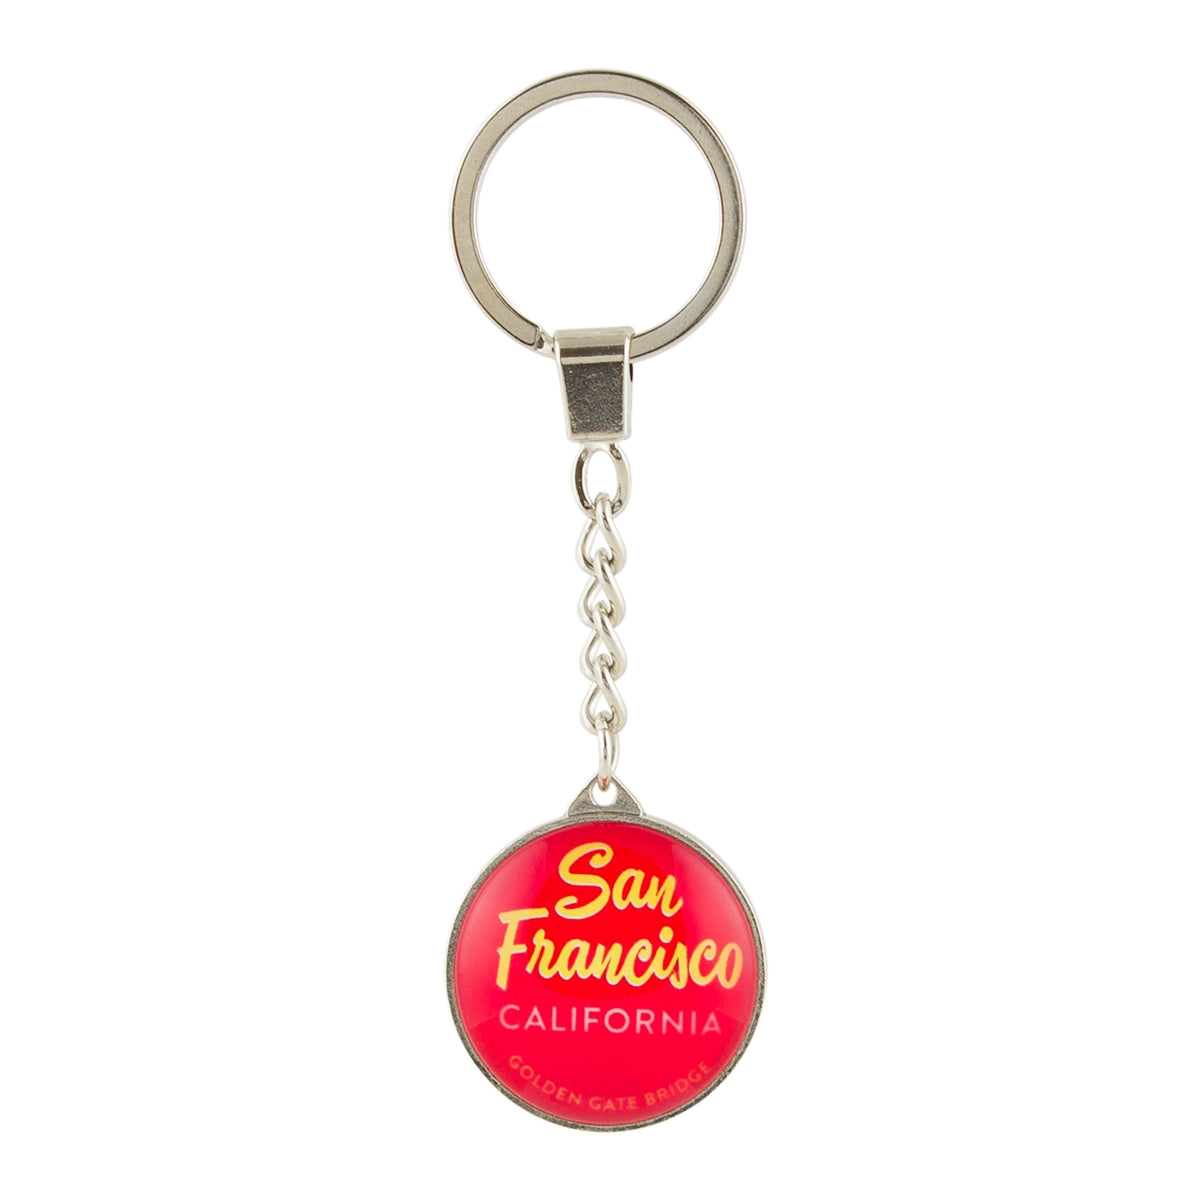 Colorful crystal keychain with text "San Francisco California Golden Gate Bridge" in yellow and white on bright red background.